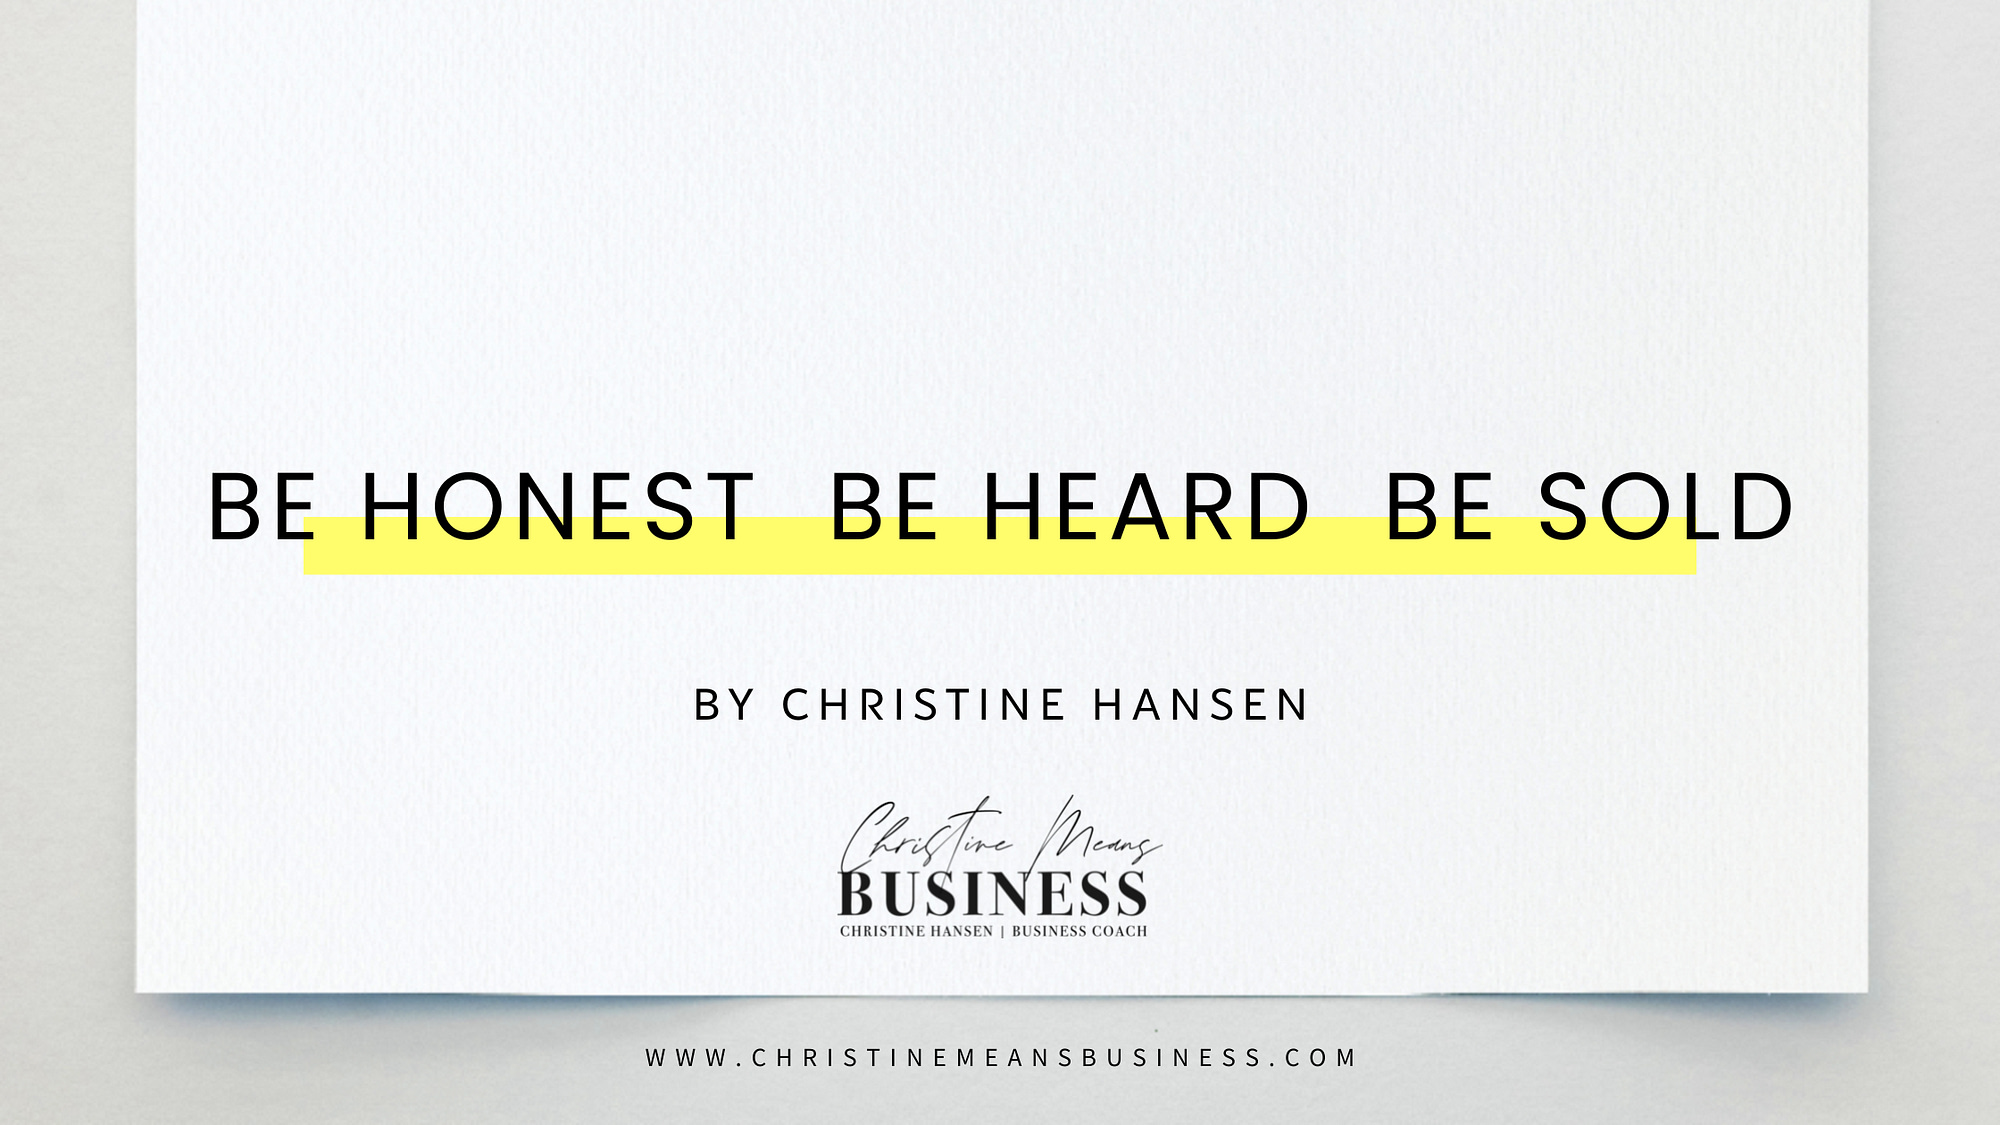 Business: Be honest, be heard, be sold